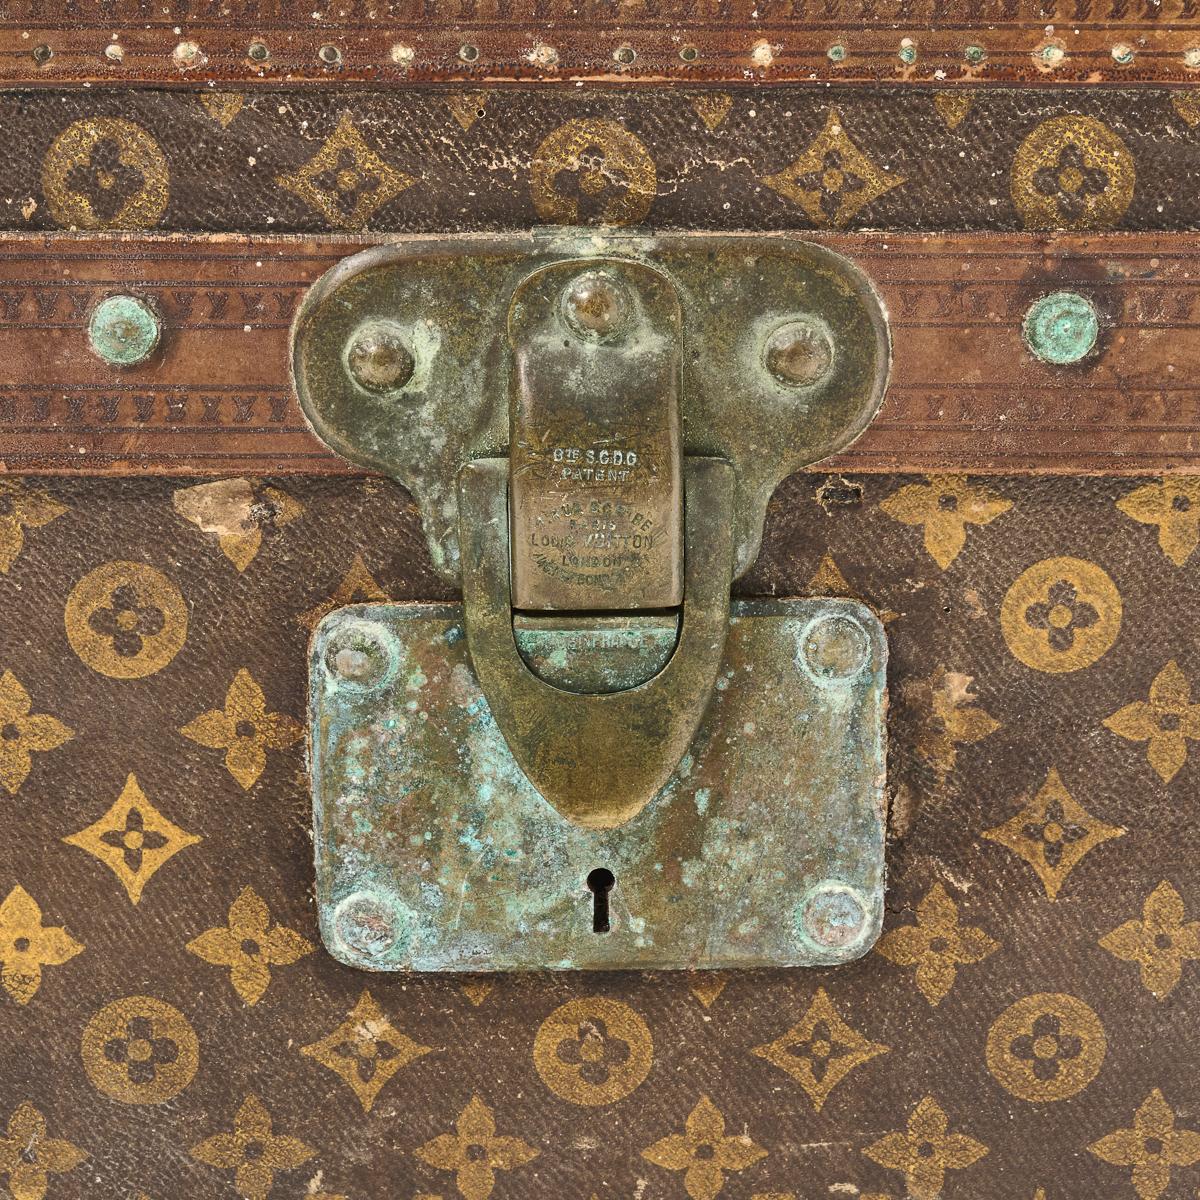 Louis Vuitton trunk packs in bids - Antique Collecting